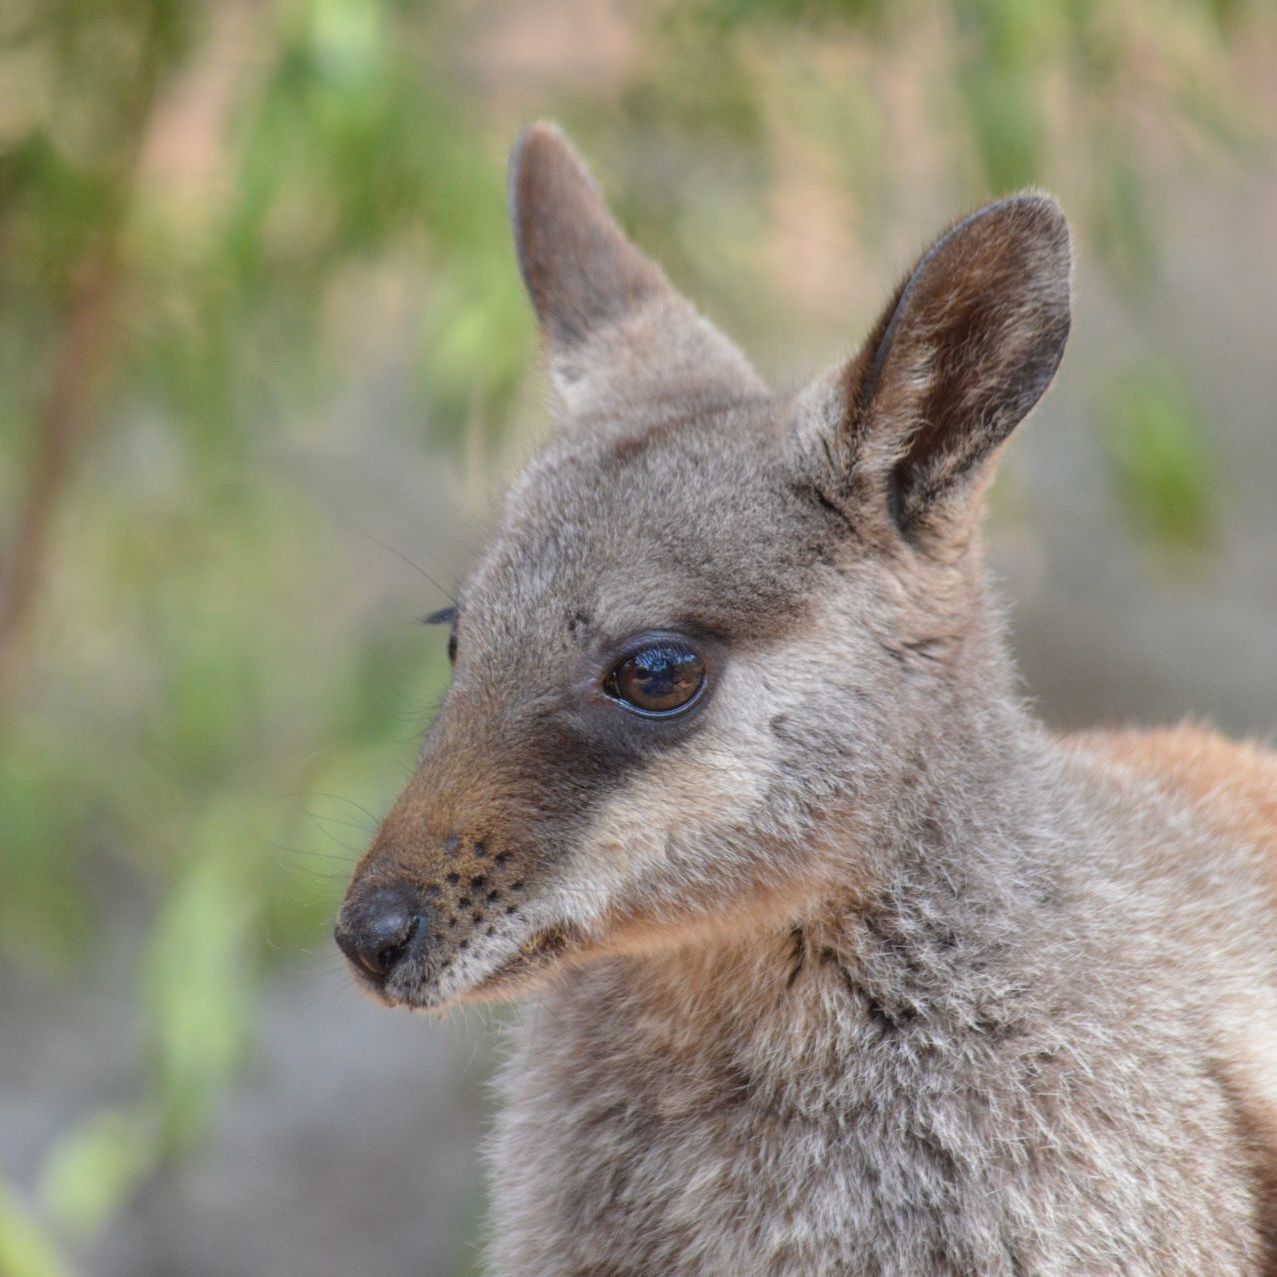 a close up of a kangaroo 's face with a blurry background .